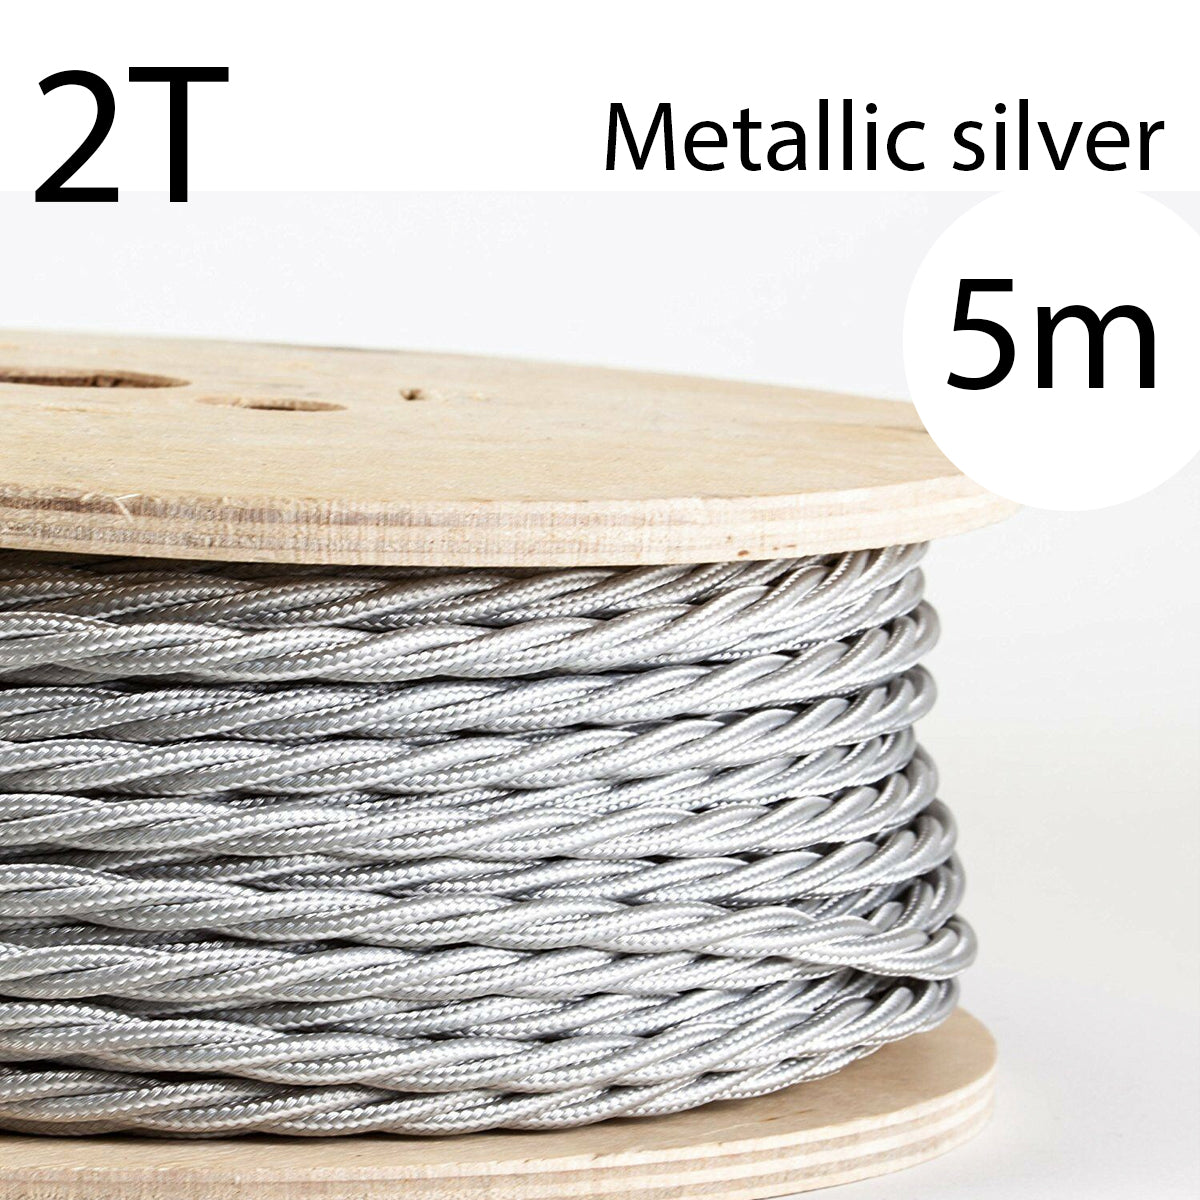 5 M 2 core fabric Braided Cable.JPG